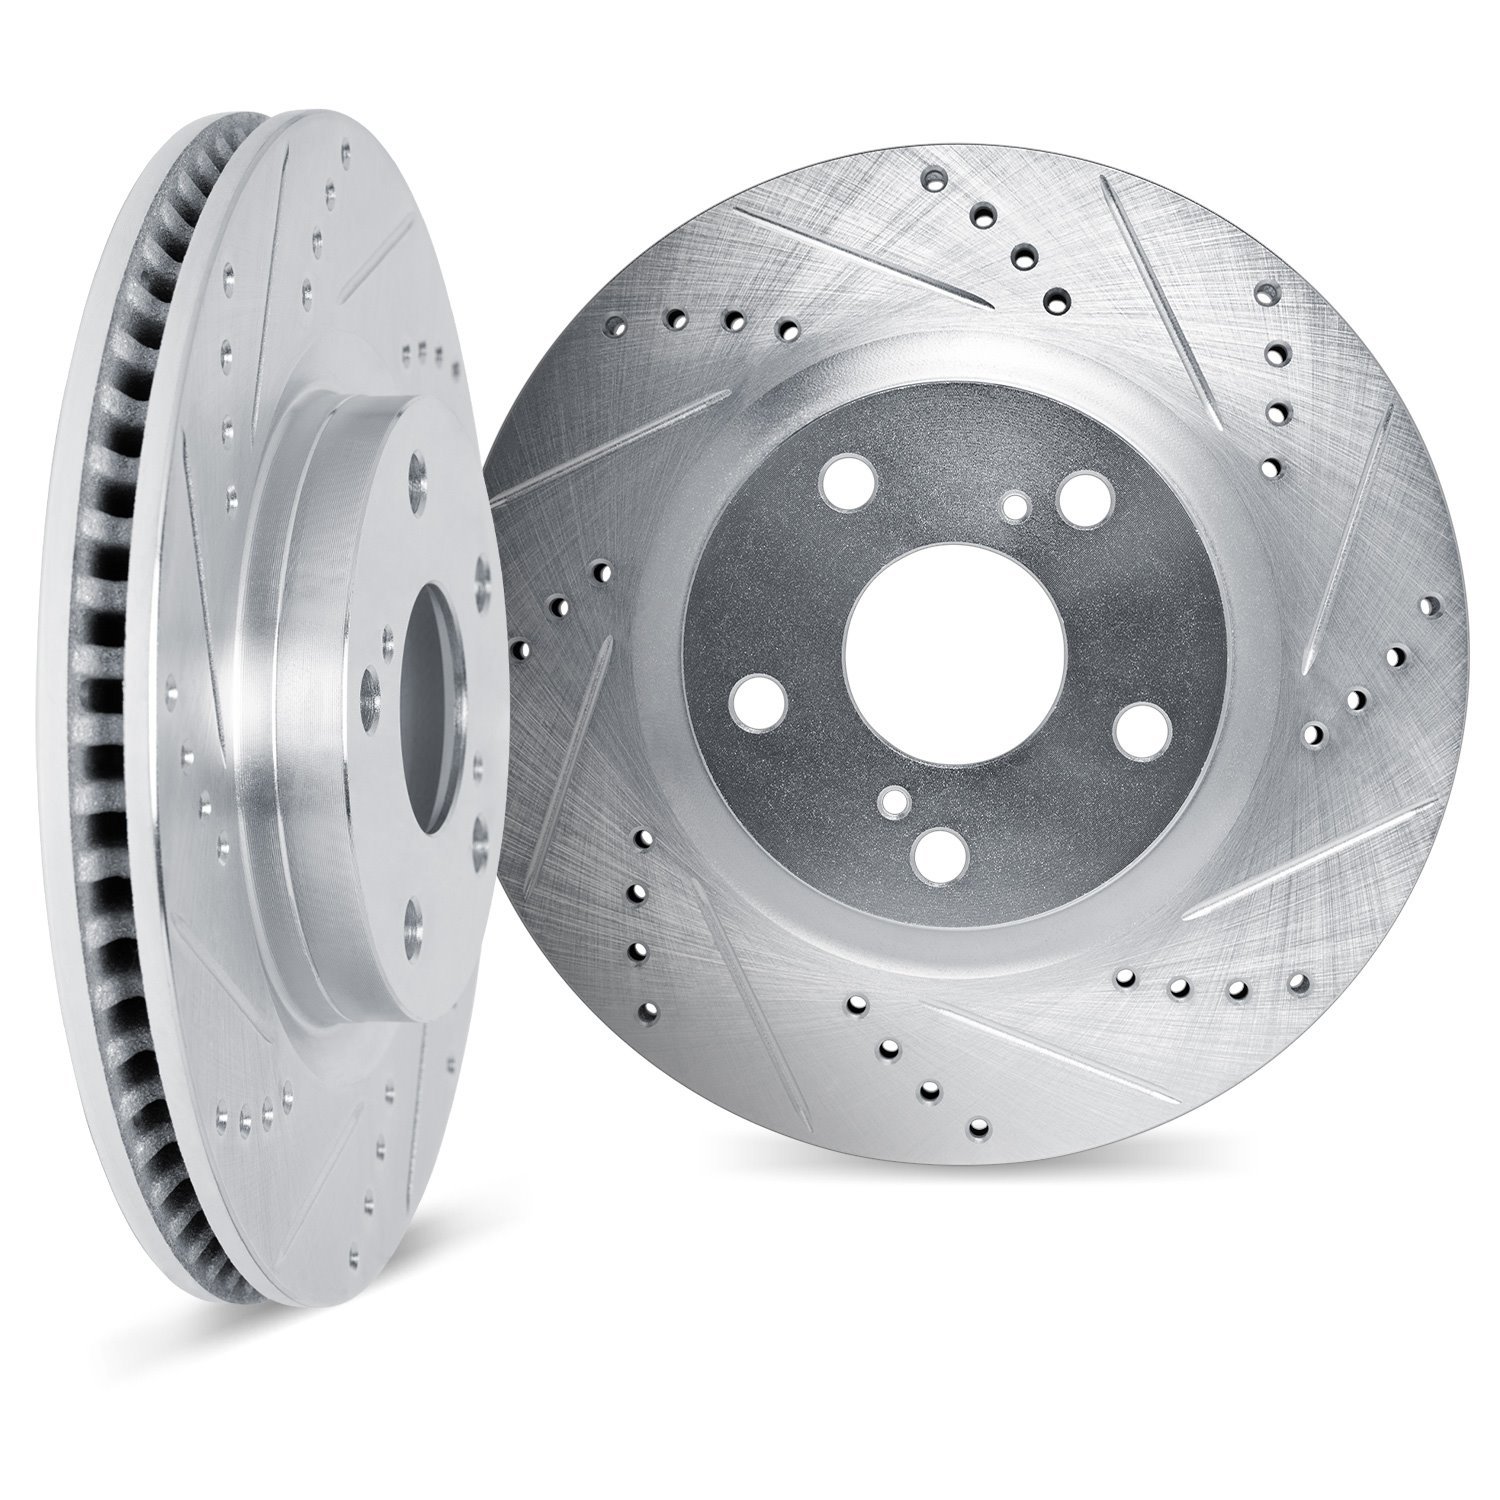 7002-68018 Drilled/Slotted Brake Rotors [Silver], Fits Select Infiniti/Nissan, Position: Rear